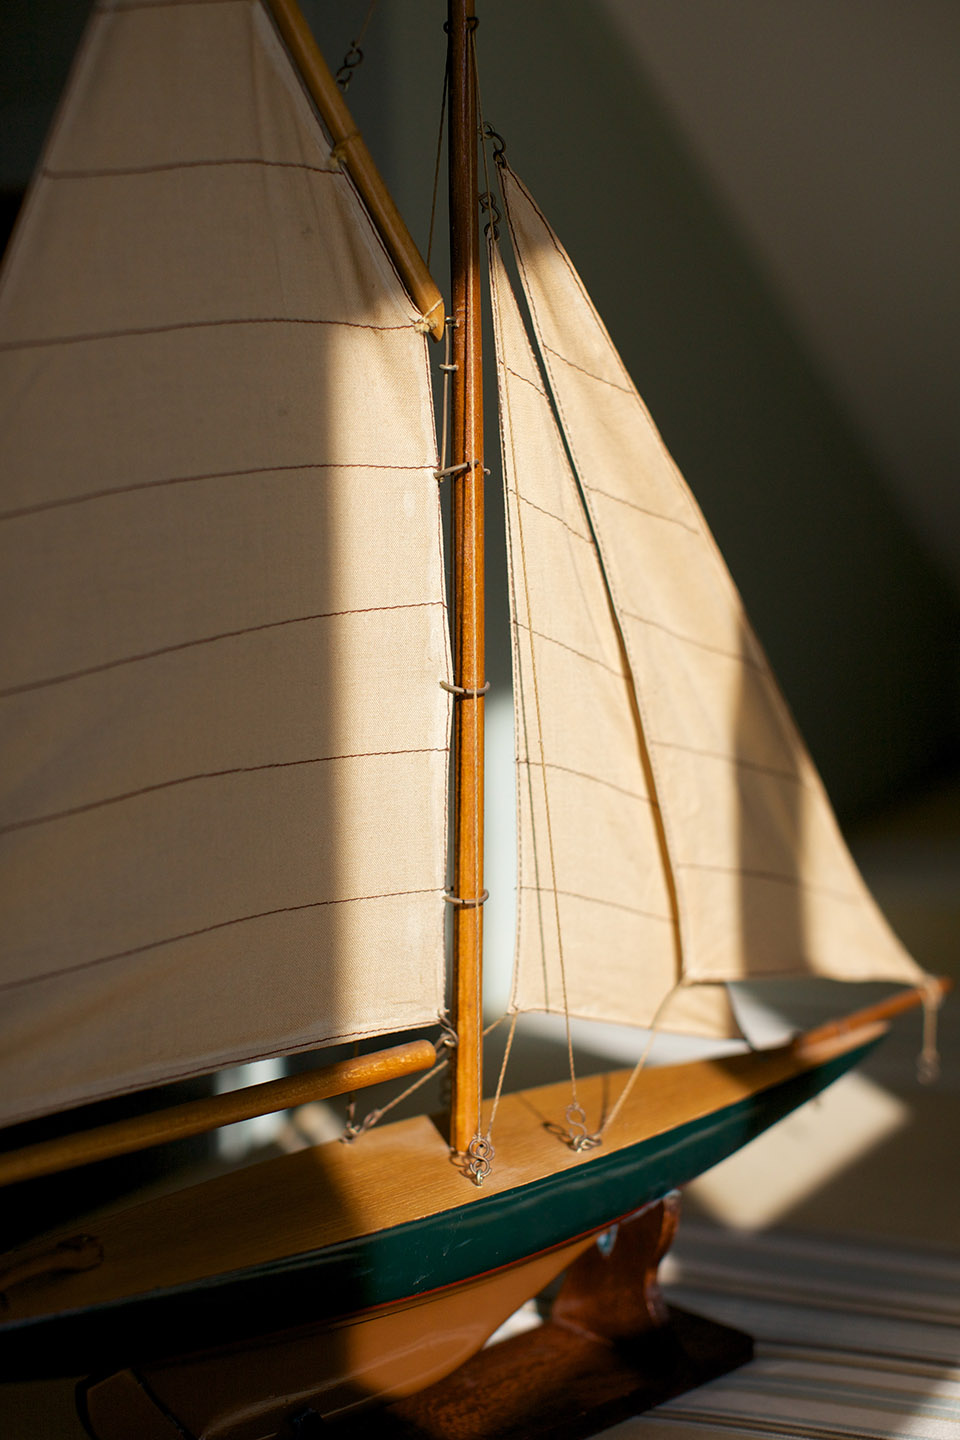 image of a model of a sailboat